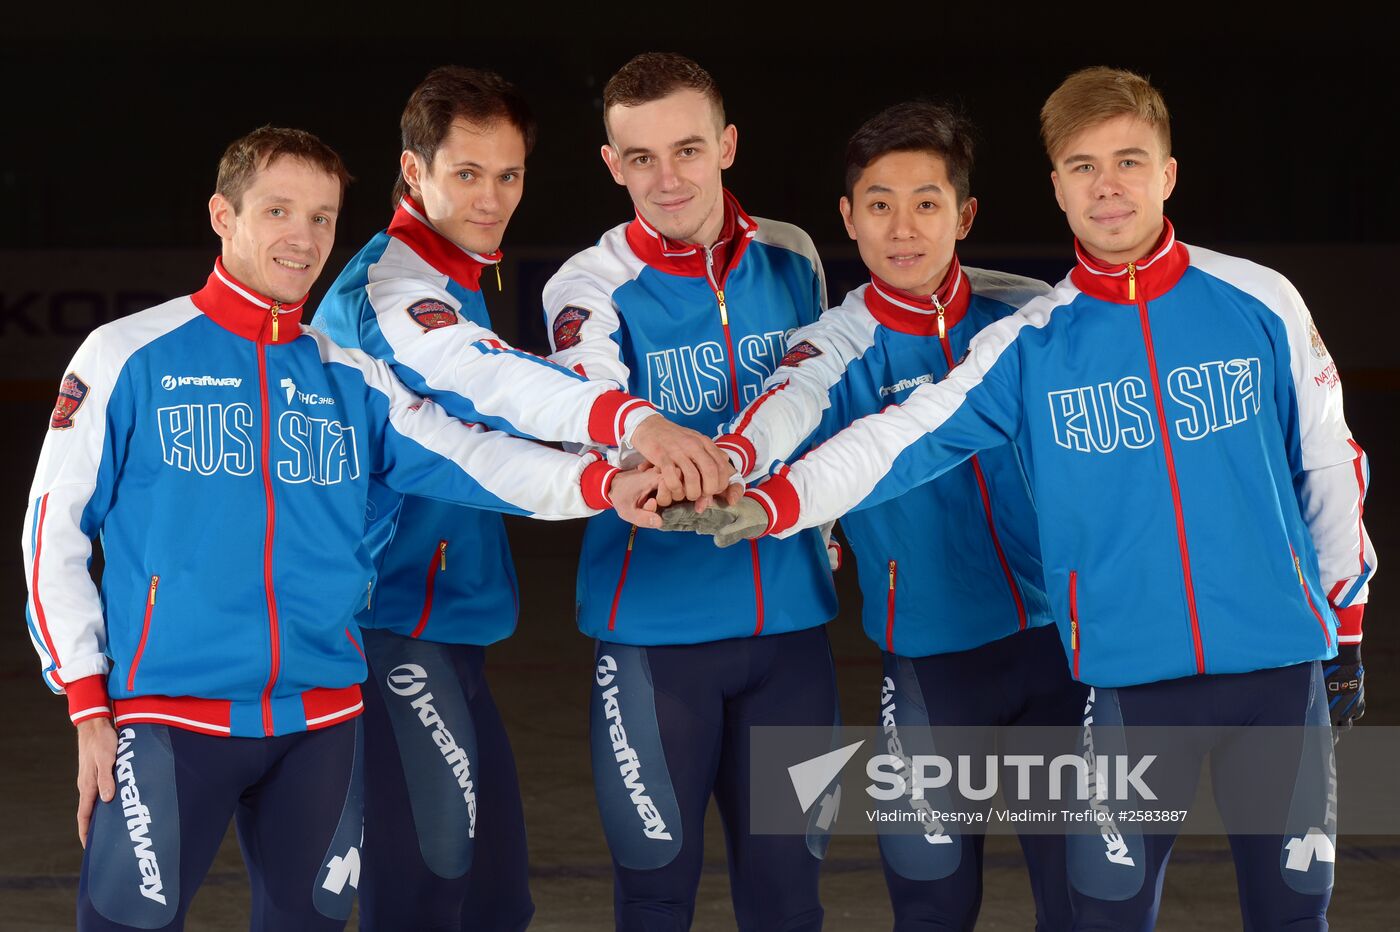 Photo shoot of Russian short track team before ISU championships in Moscow